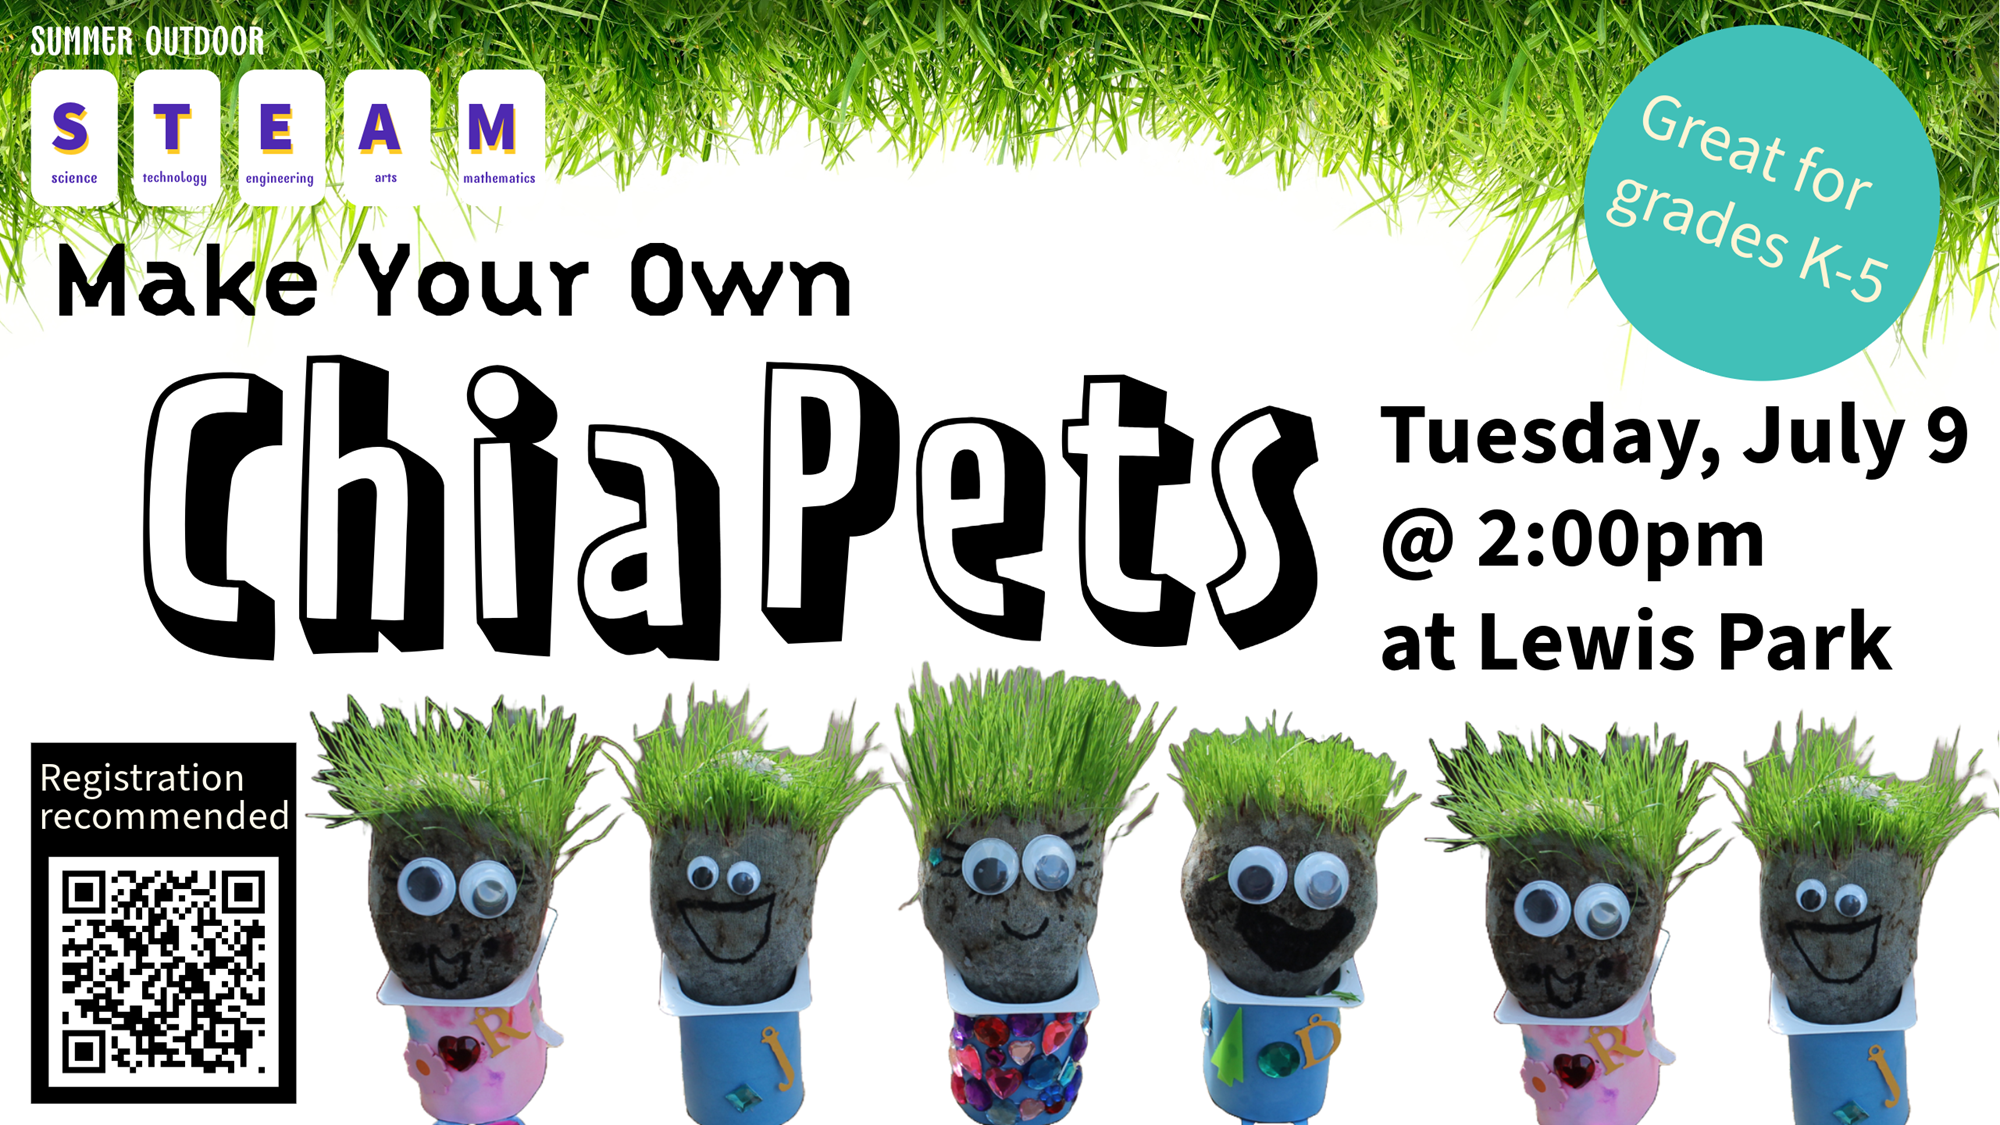 Summer Outdoor STEAM, Make Your Own Chia Pets. Tuesday, July 9 @ 2:00 PM at Lewis Park. Great for grades K-5.